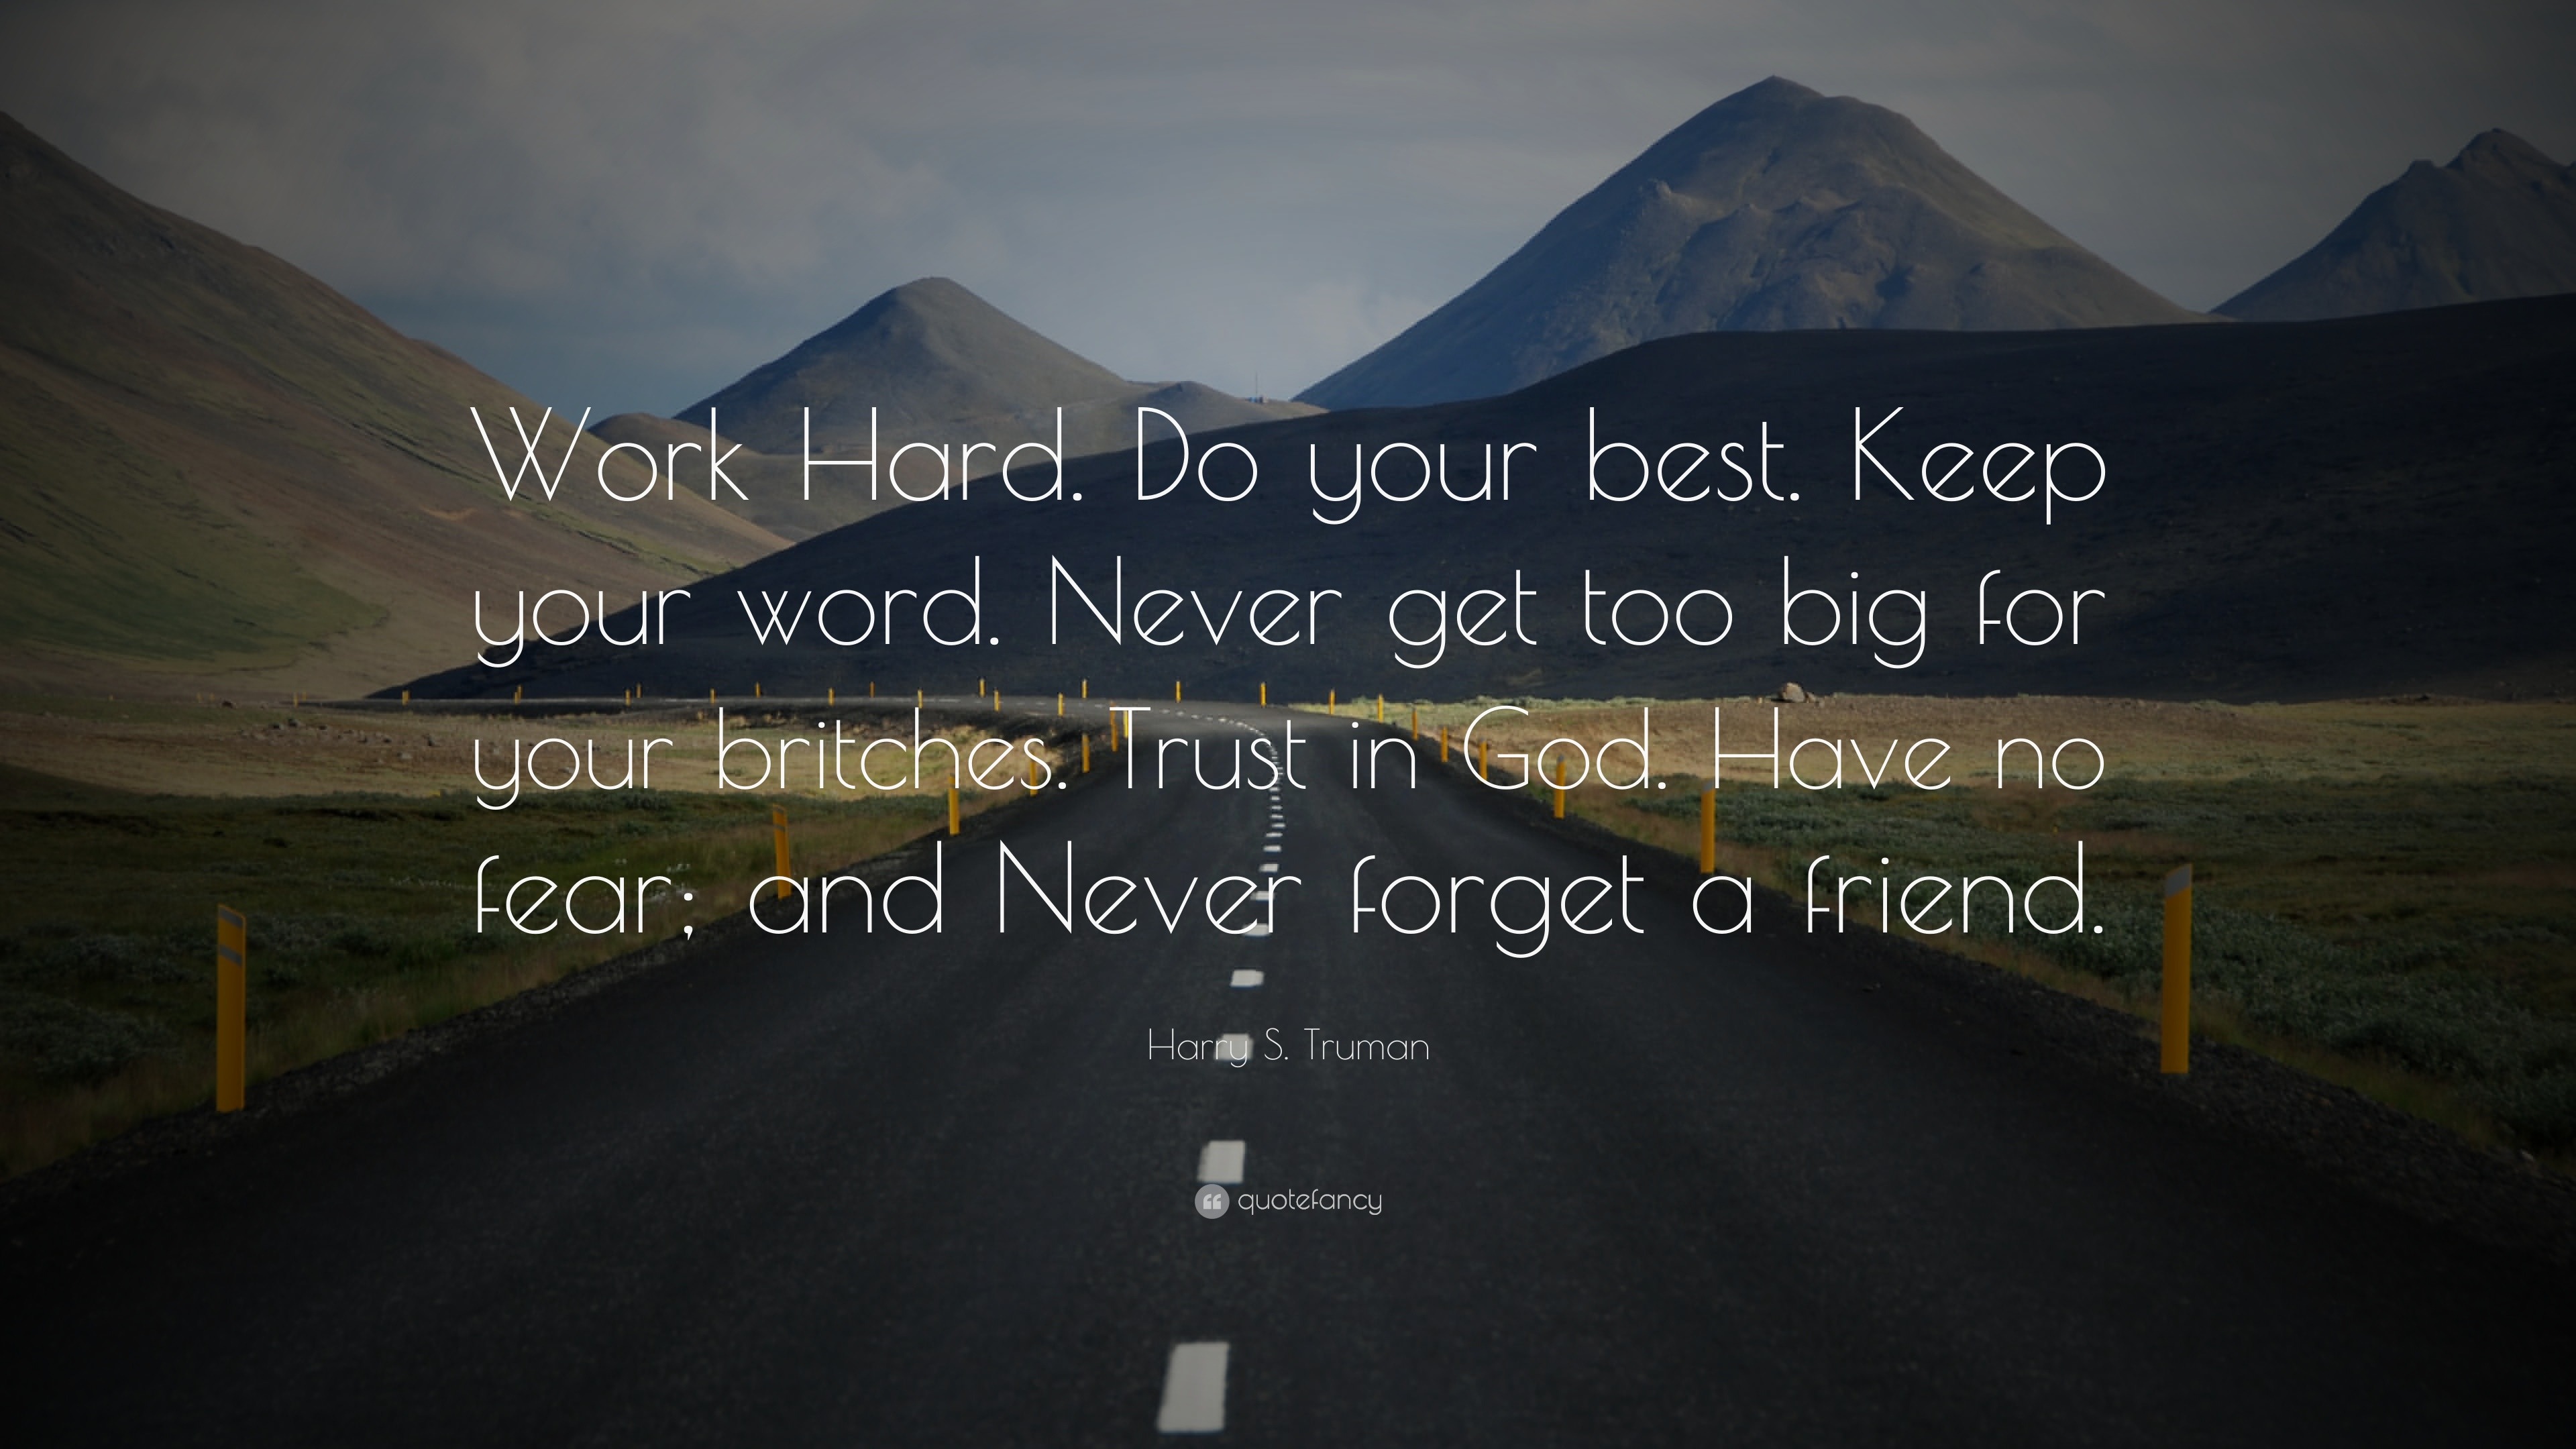 Harry S. Truman Quote: “Work Hard. Do your best. Keep your word. Never get  too big for your britches. Trust in God. Have no fear; and Never forg...”